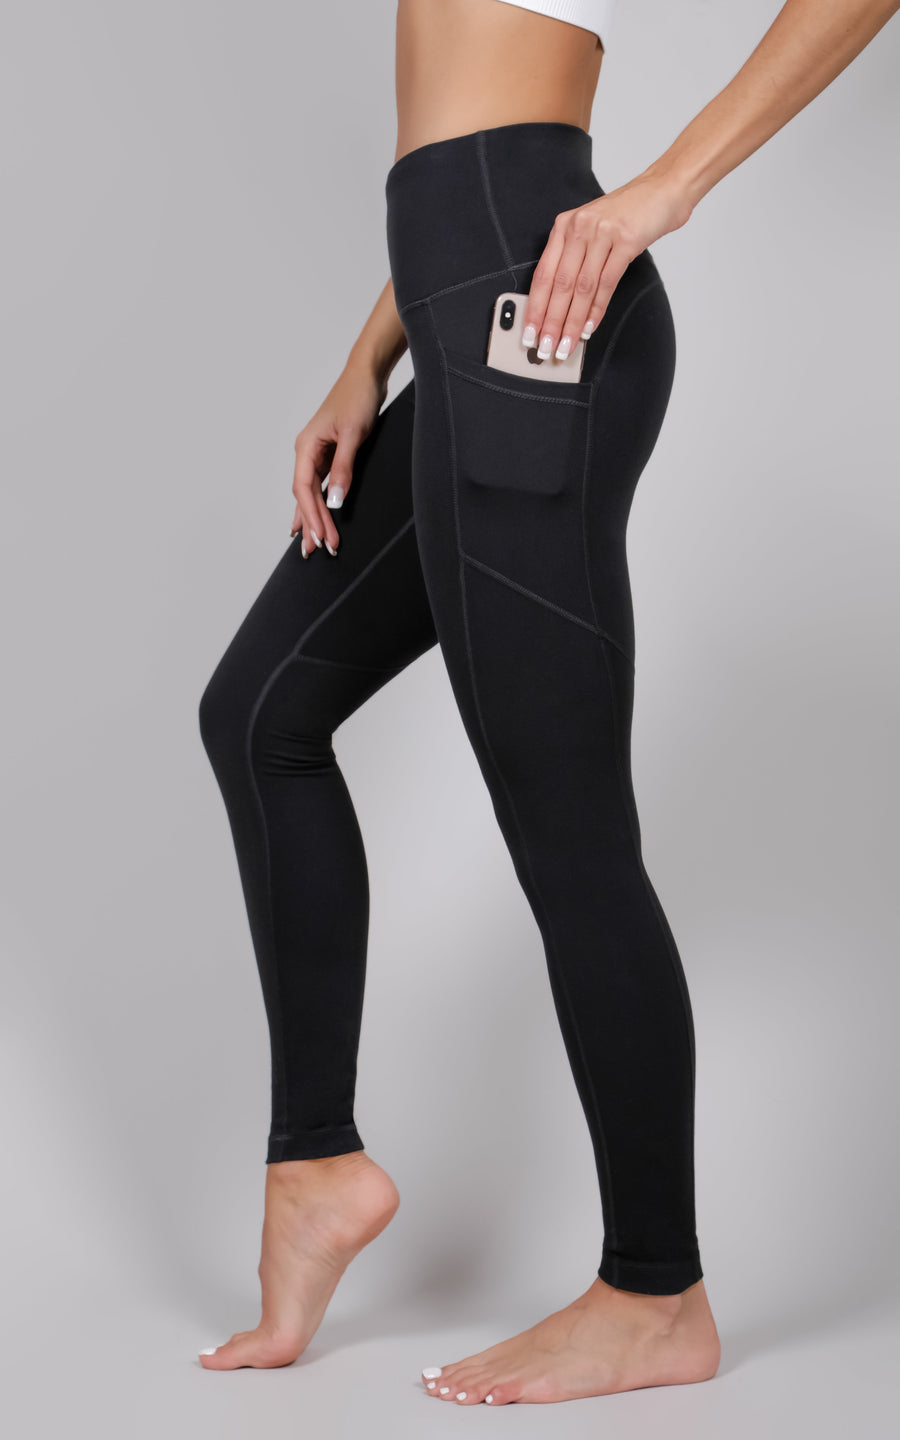 Women's 90 Degree by Reflex Pants - up to −51%